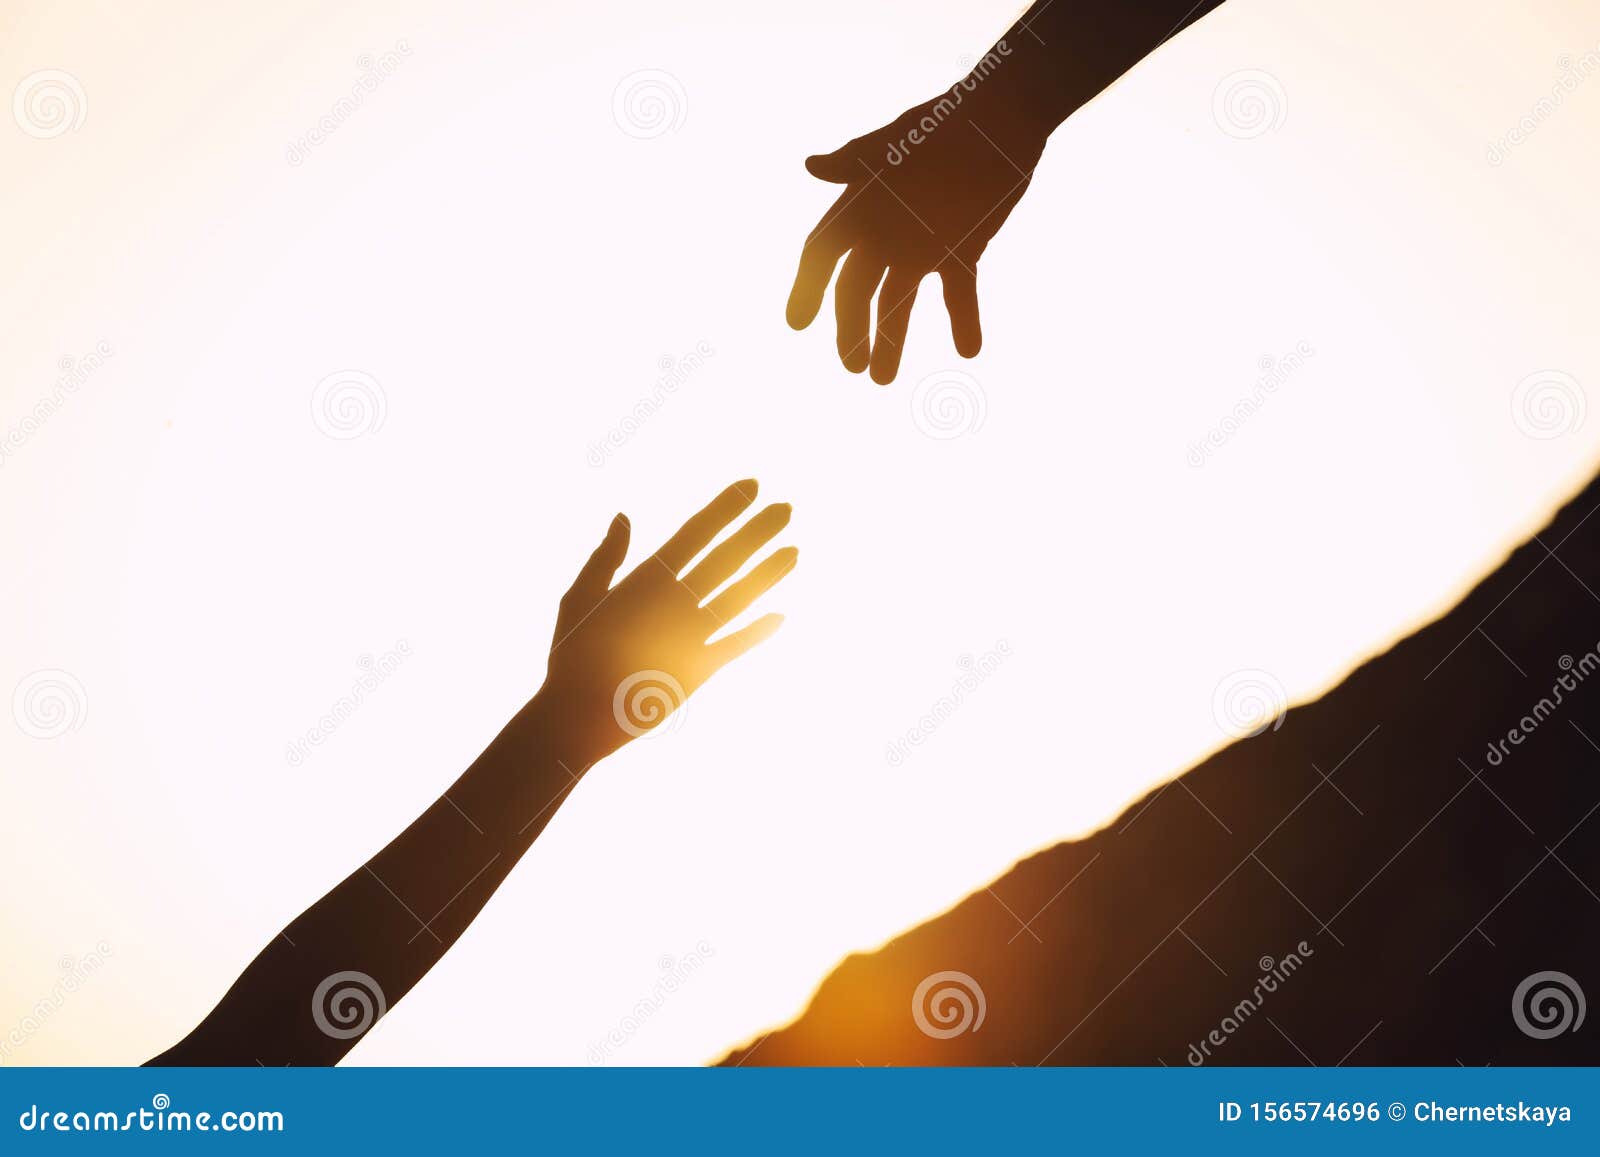 silhouettes of man and woman helping each other to climb on hill against sunset